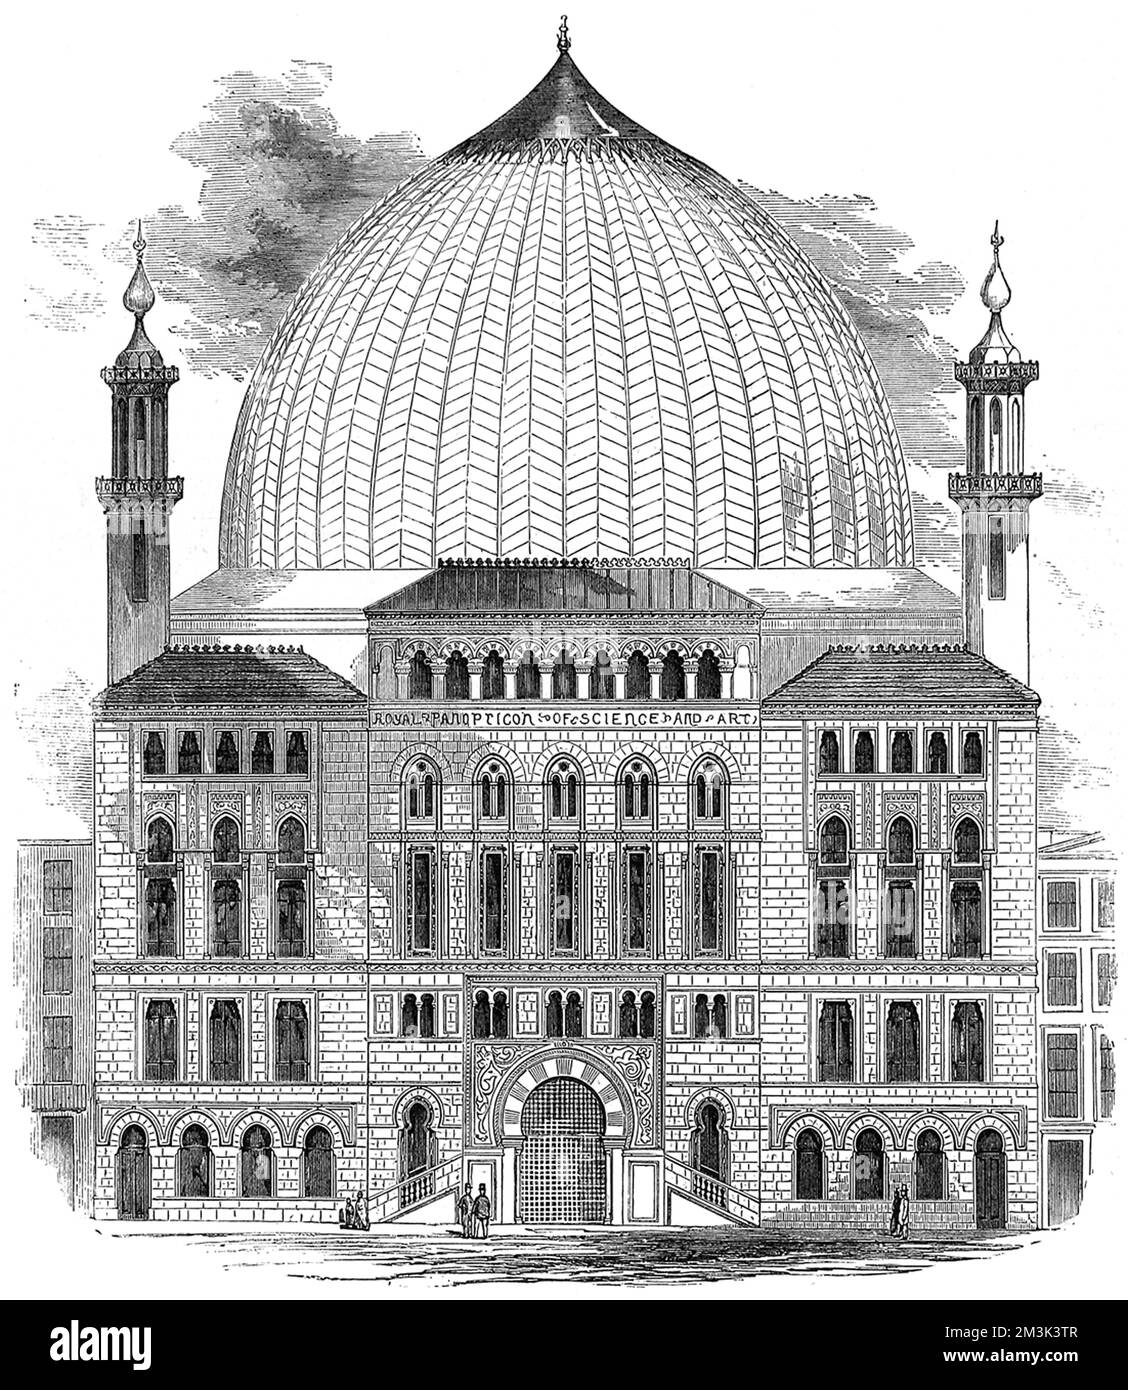 The Royal Panopticon of Science and Art, which was being built in Leicester Square during 1852. When constructed the Panopticon's dome was somewhat smaller in size than this image suggests.  This building later became the Alhambra Theatre and then the Odeon.  1852 Stock Photo